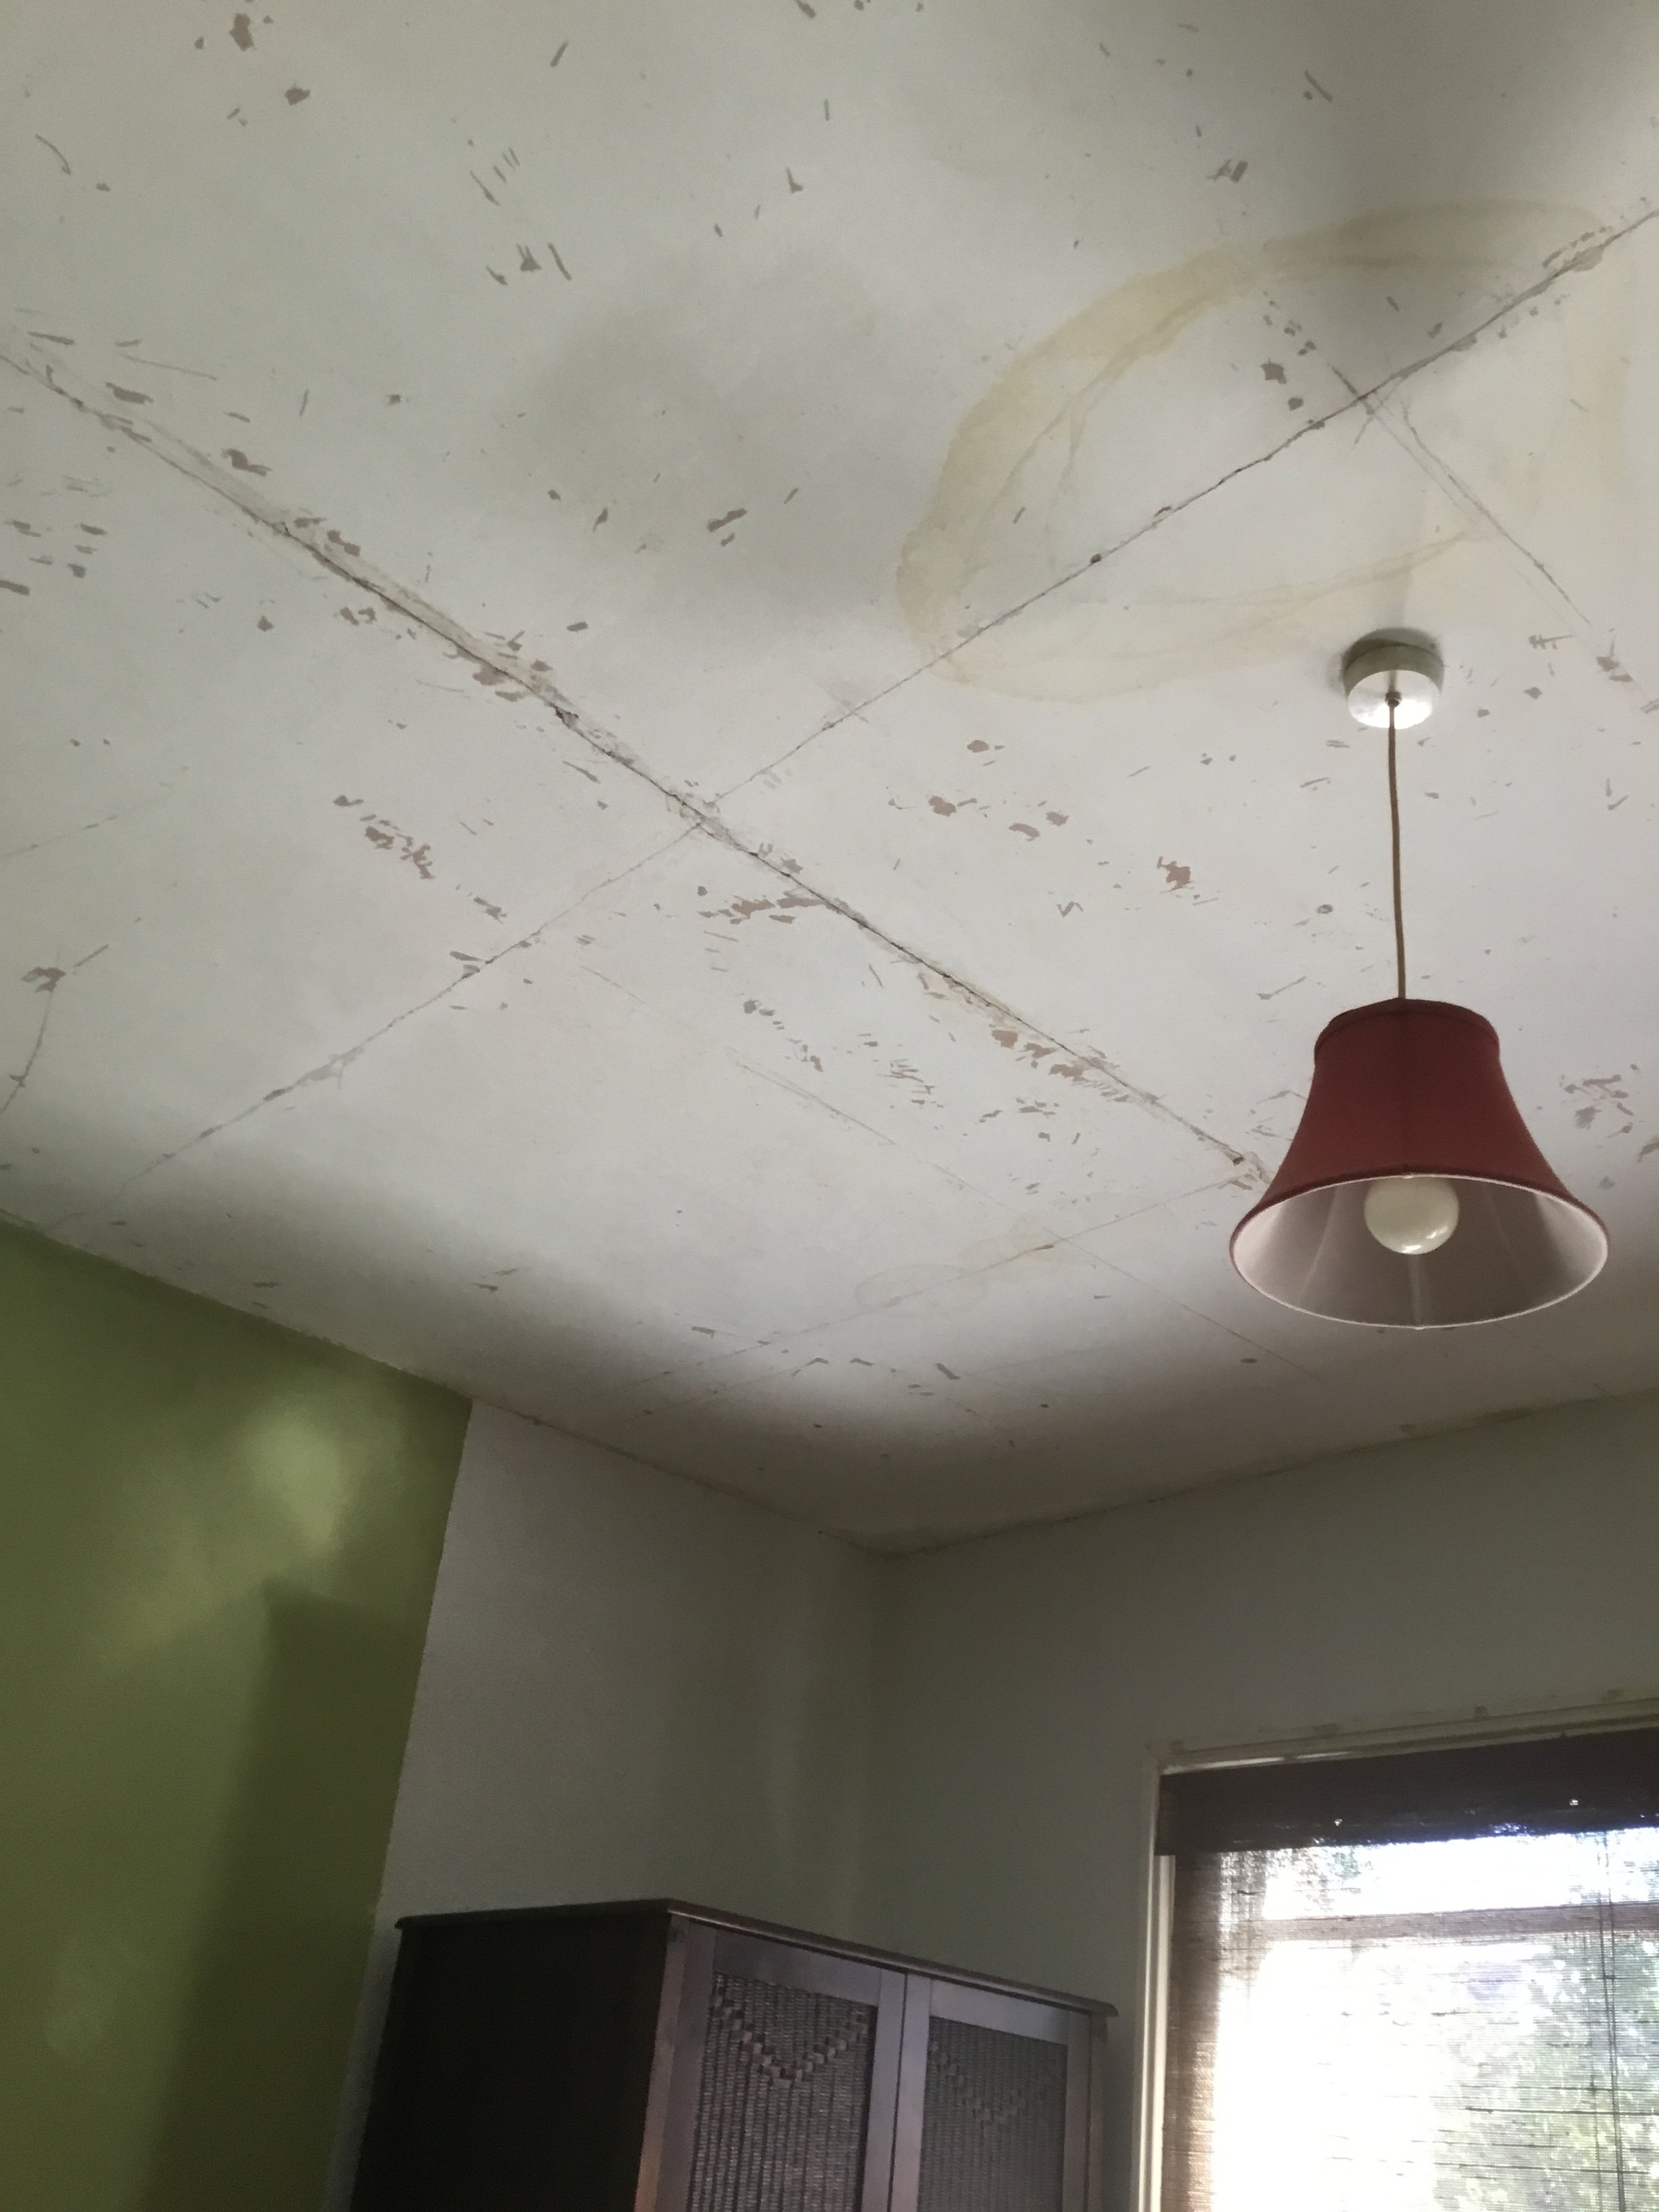 Council house ceiling help needed please